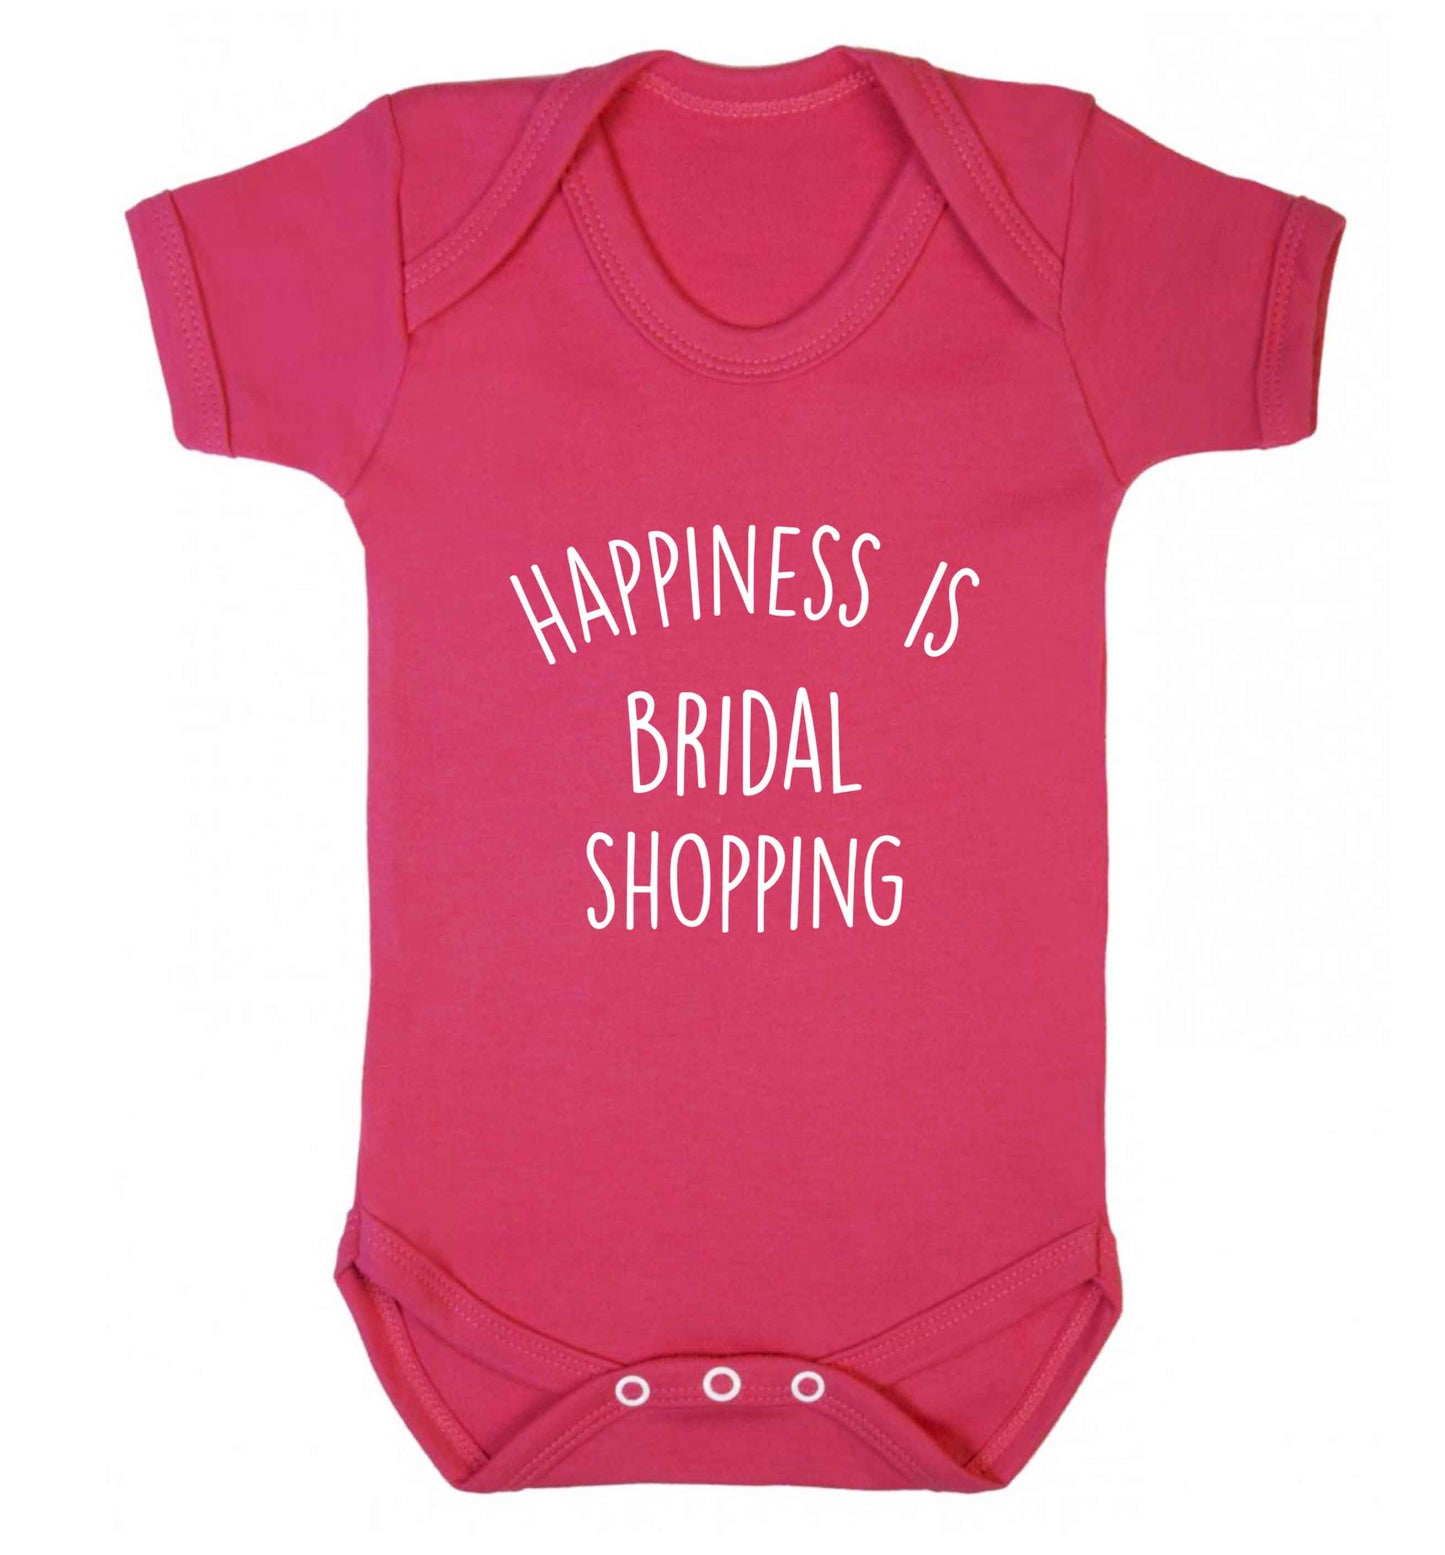 Happiness is bridal shopping baby vest dark pink 18-24 months